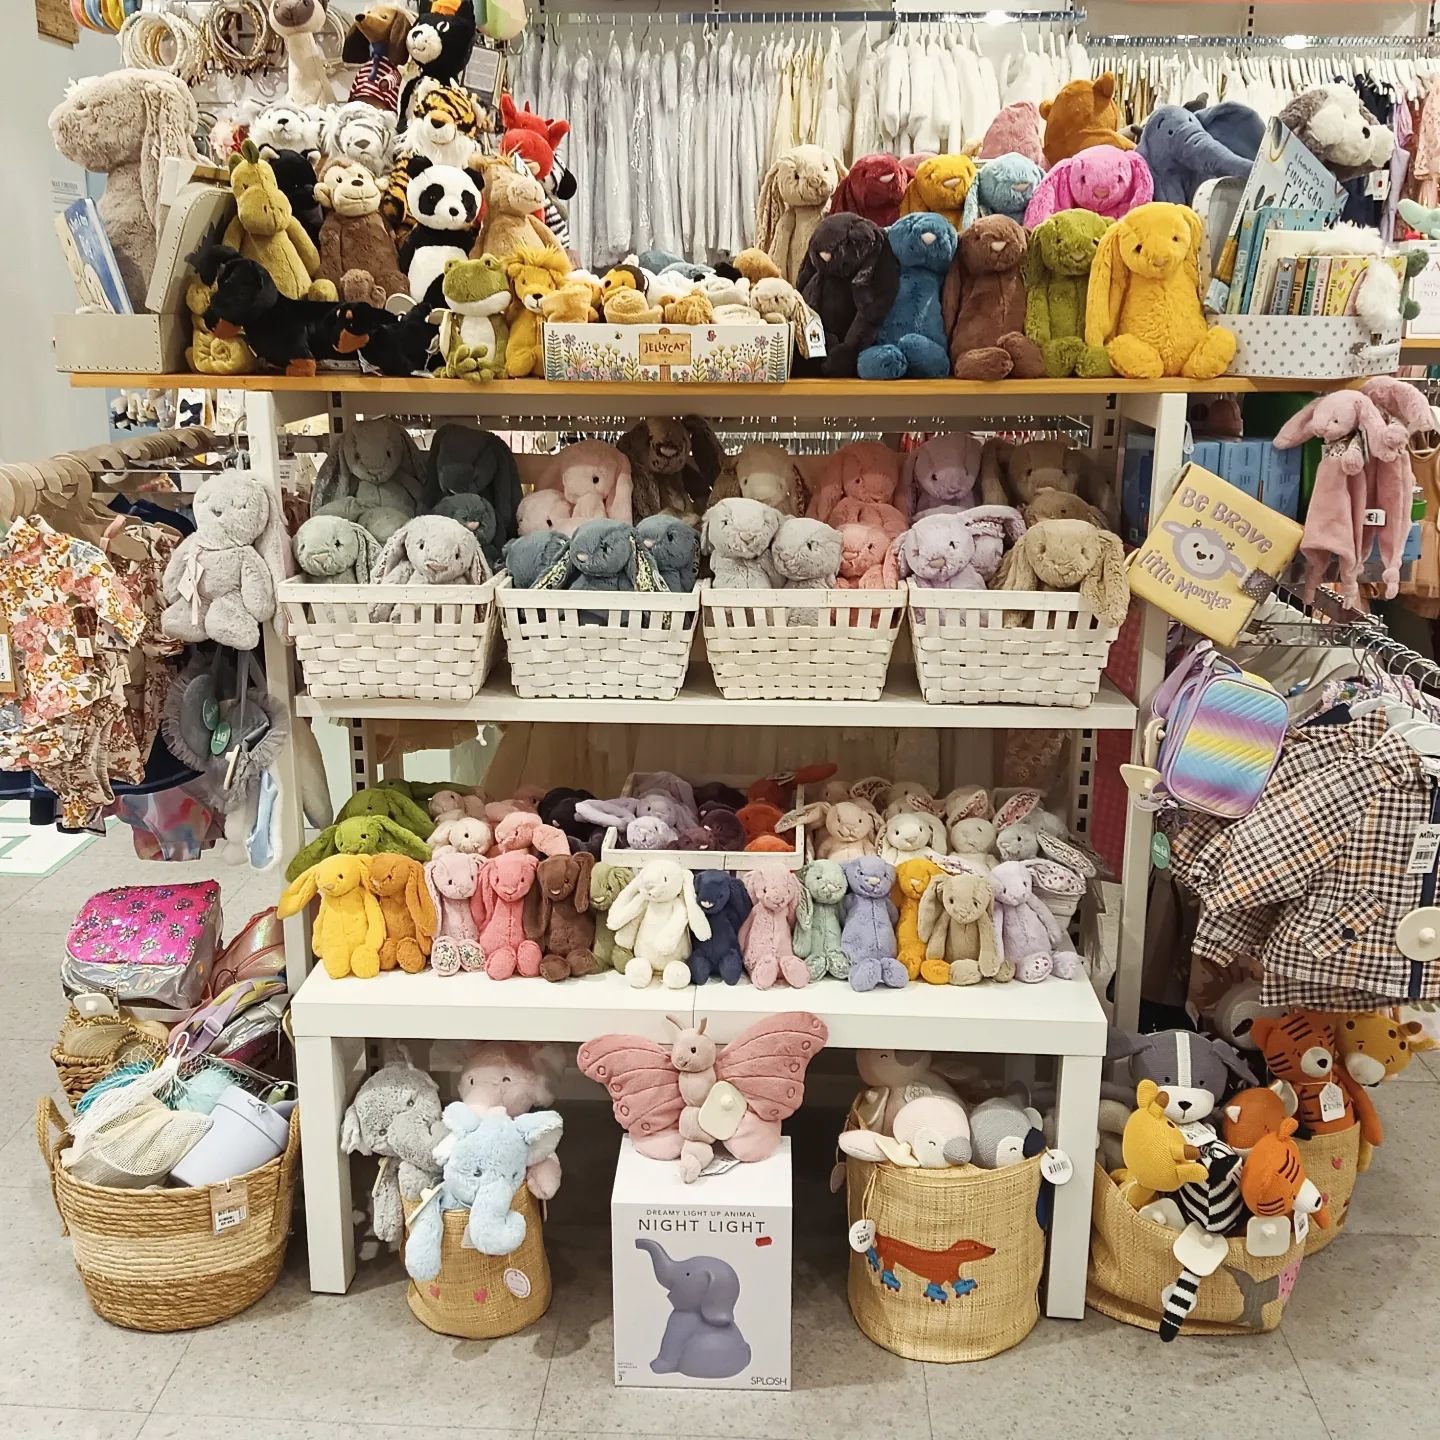 Beat seller 
You won't be disappointed in our Jellycat range in store and online.
https://junokids.com.au/jellycats

#jellycat #plushtoys #bunny #kidstoys #teddies #toystorekarrinyup #karrinyupshoppingcentre